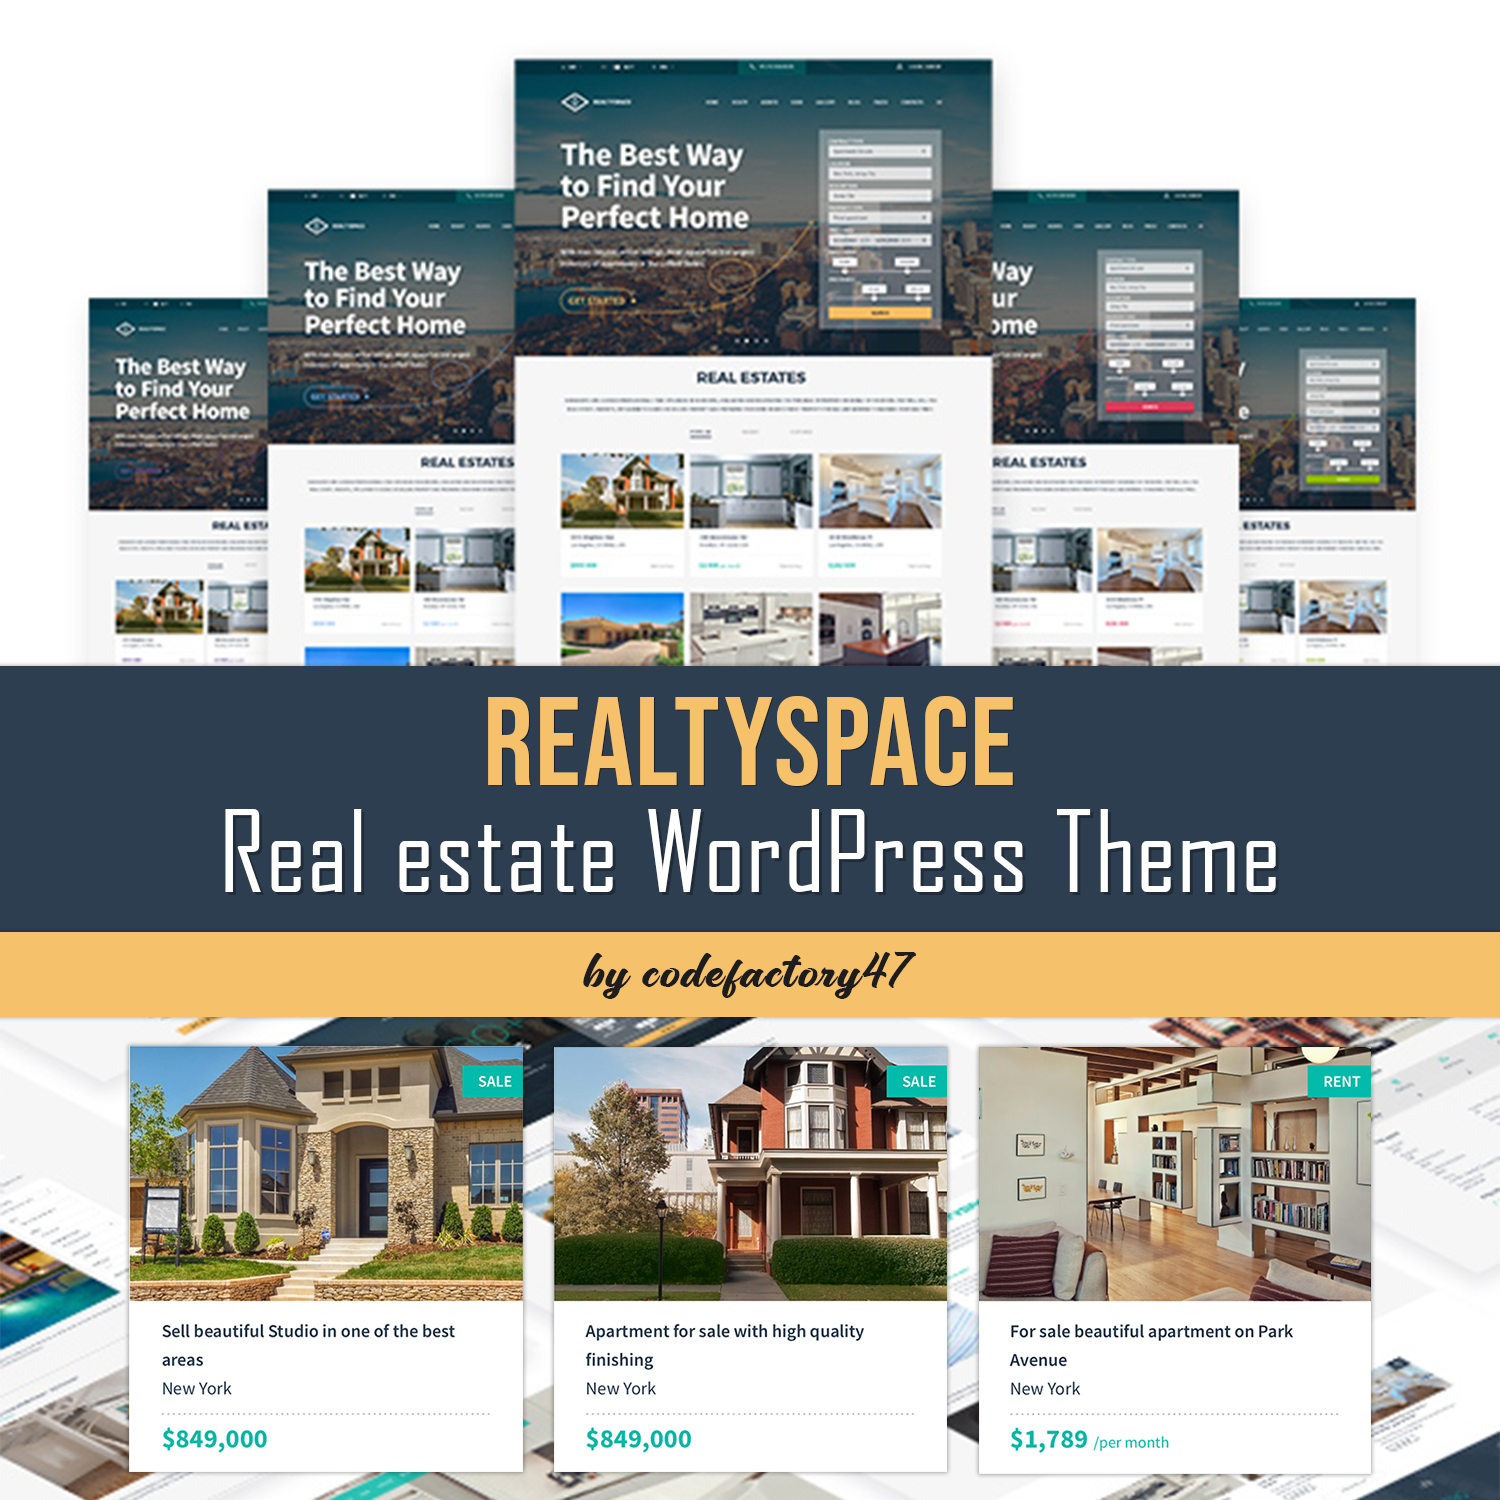 Images with realtyspace real estate wordpress theme.